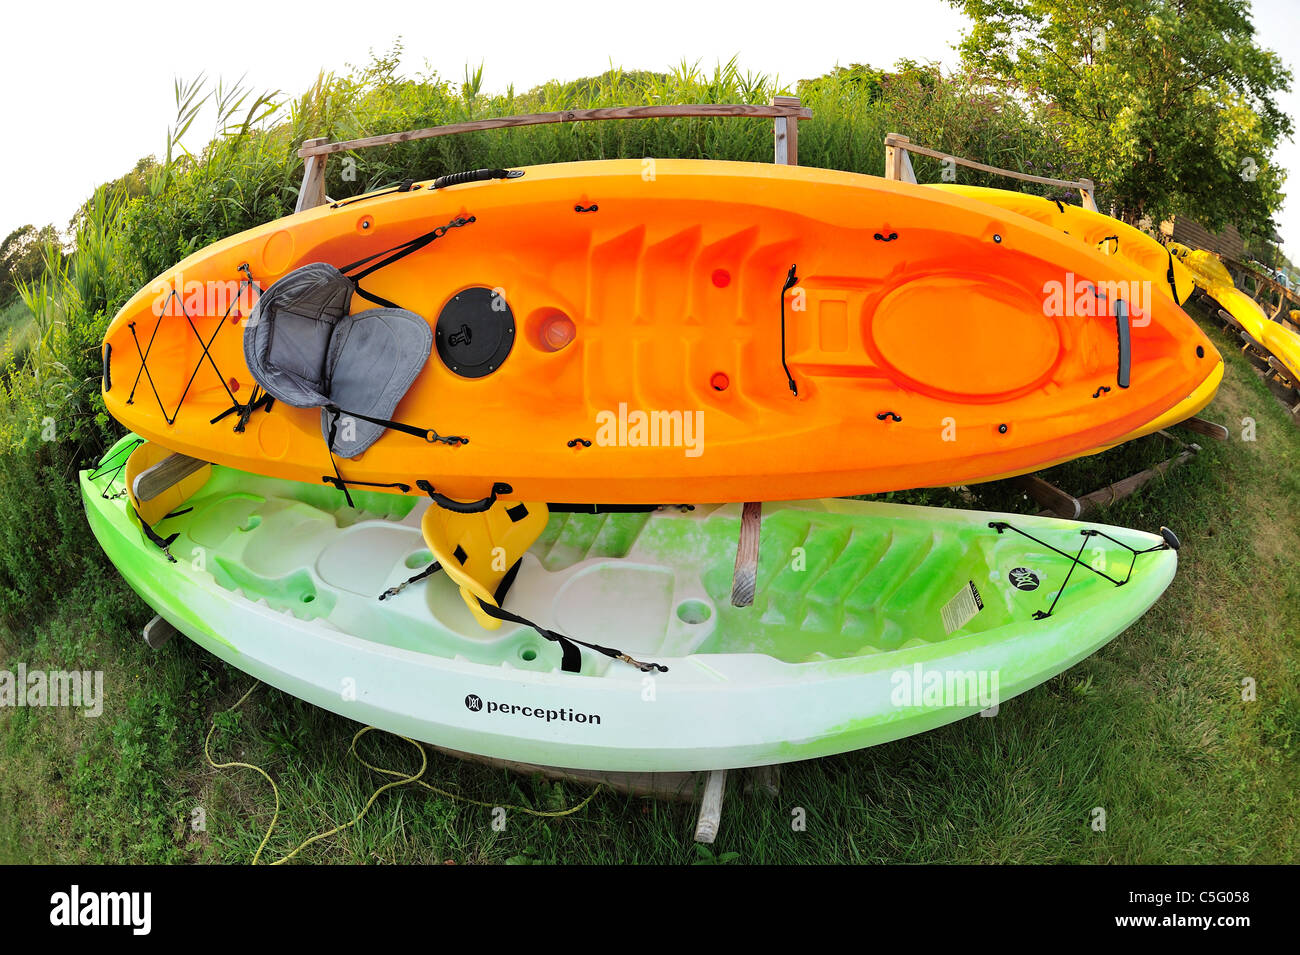 Kayaks, two on racks, for marshland waterway in Long Island, New York, at Norman Levy Park and Preserve (180 degree fisheye) Stock Photo